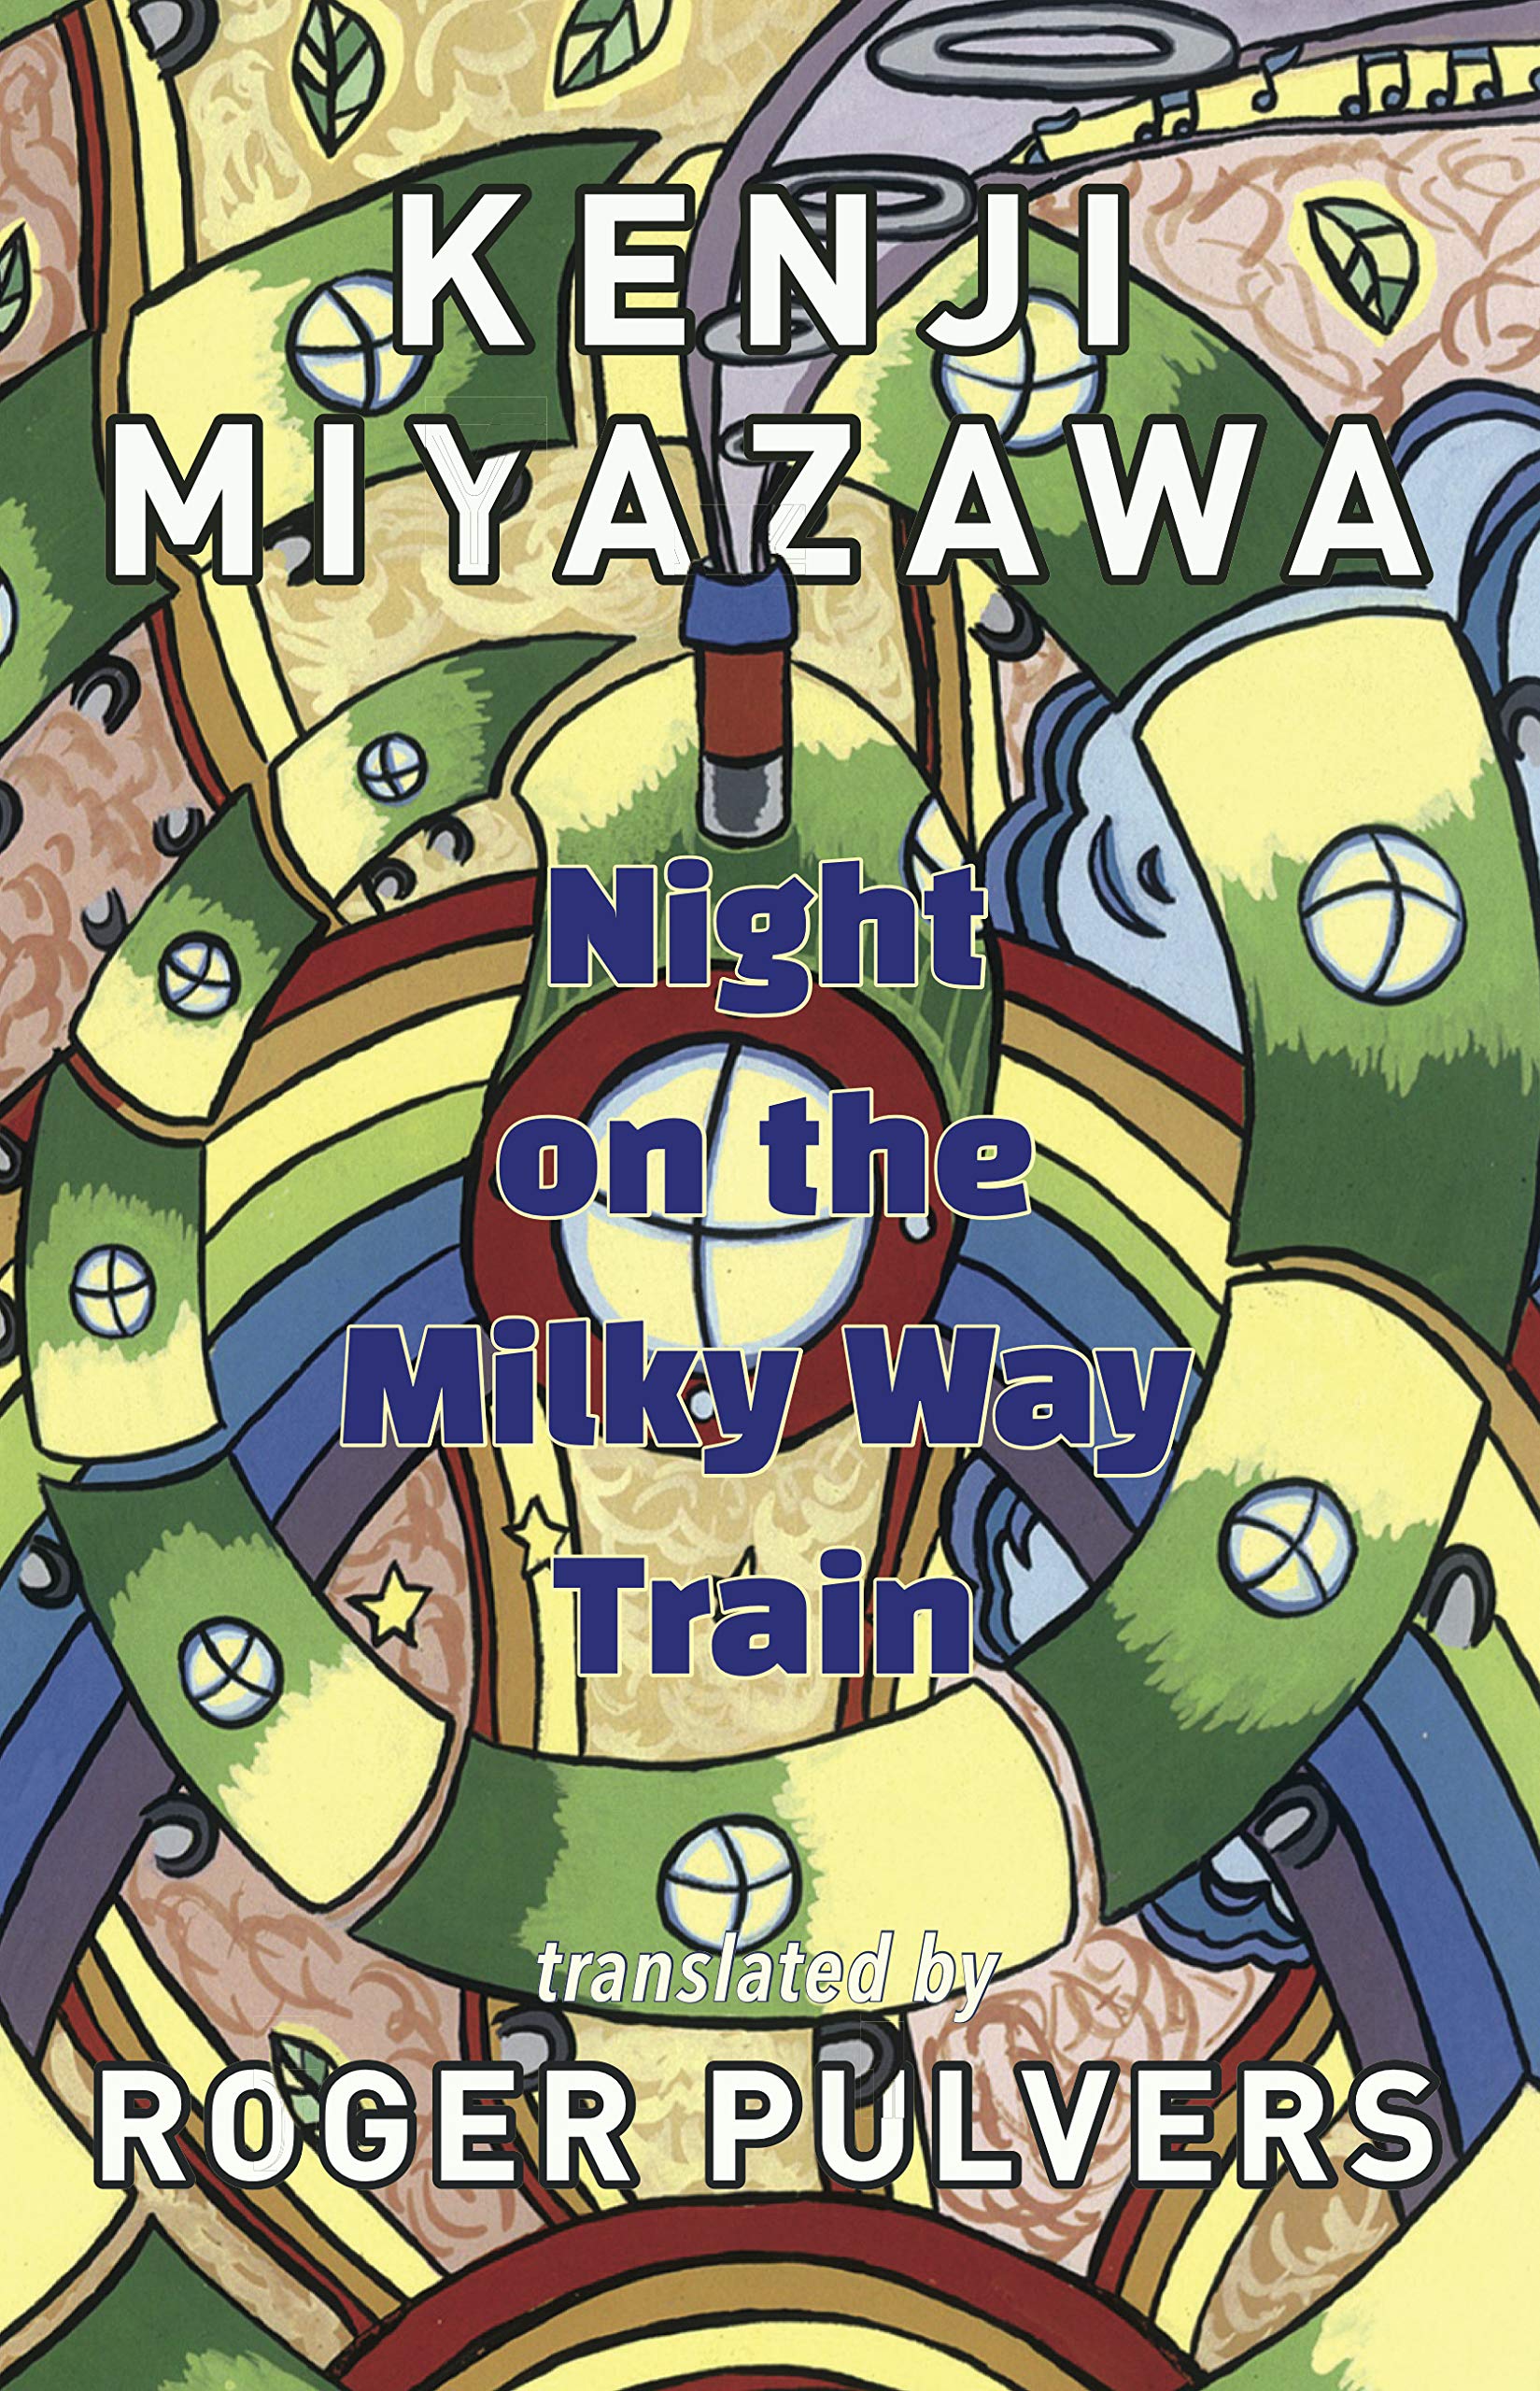 Cover of Night on the Milky Way Train featuring a surreal illustration of a train that's twisted into a coil and taking up all available space on the cover. It's green, yellow, beige, with a little blue and dark red.